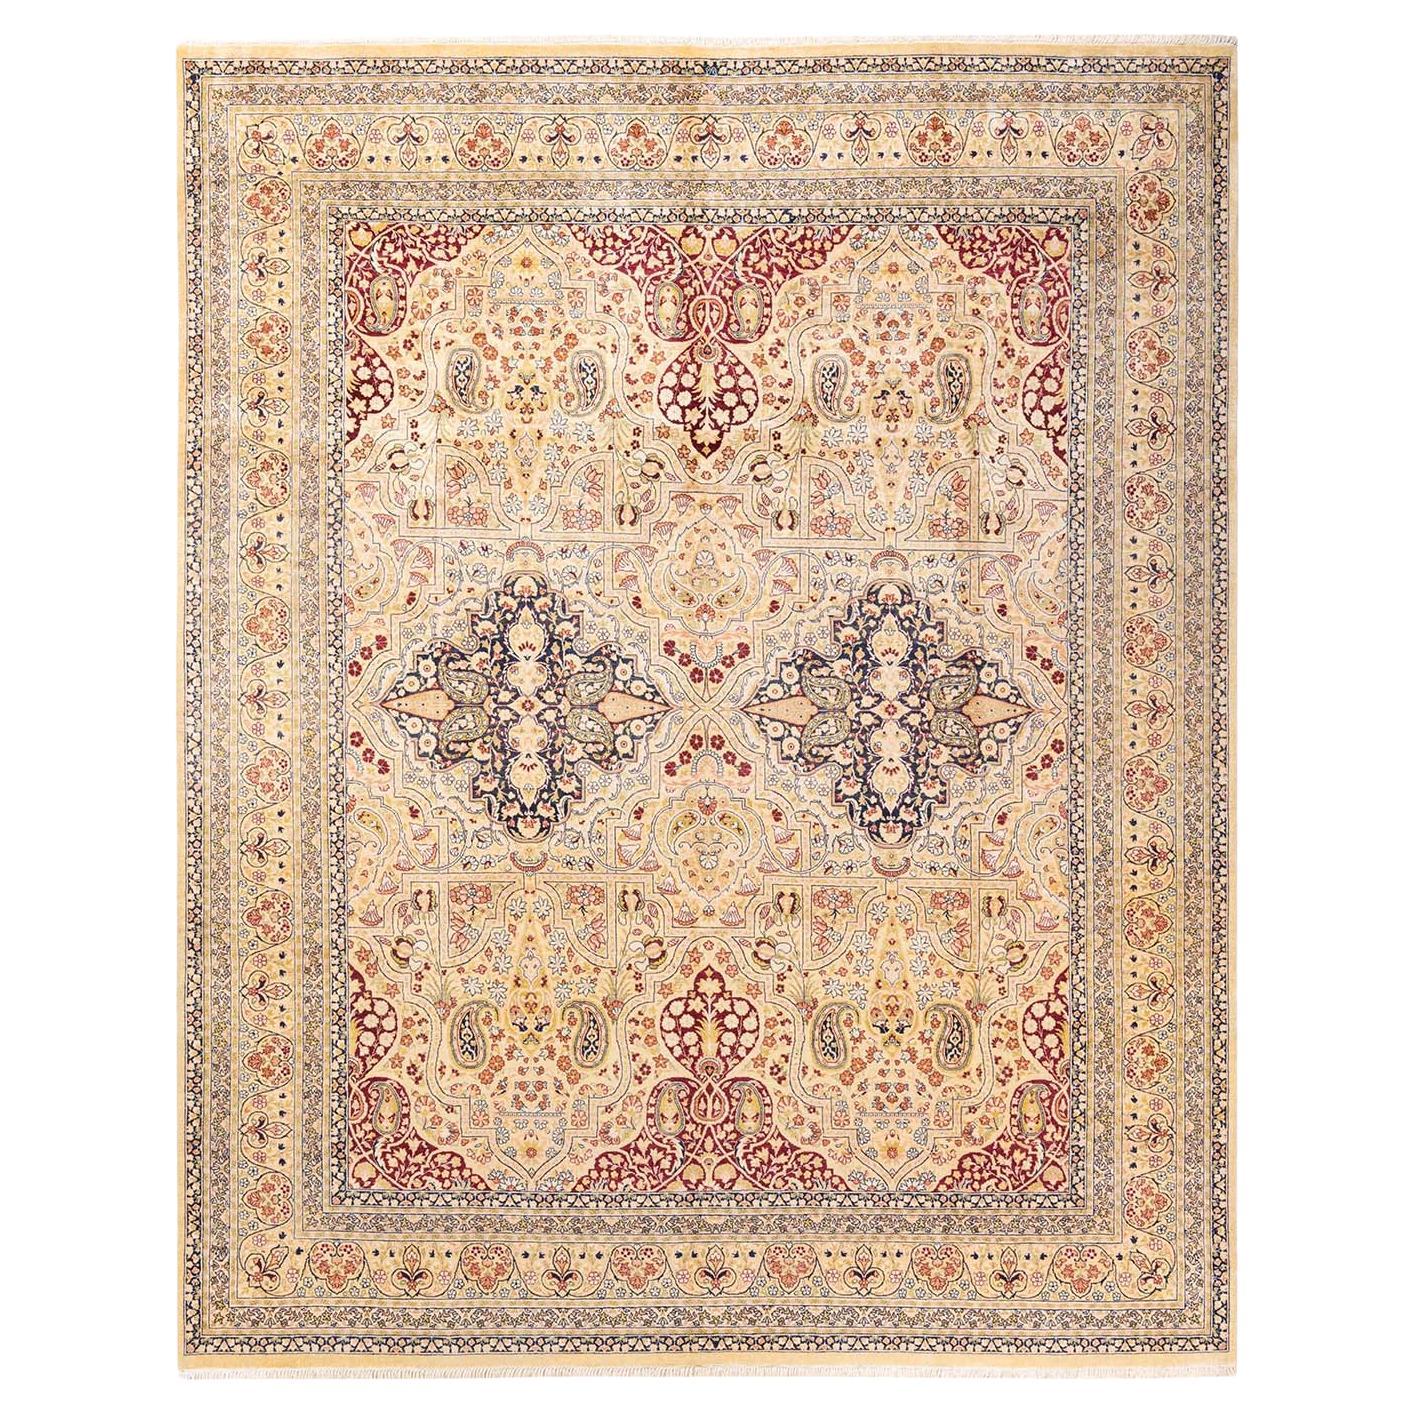 One-of-a-Kind Hand Knotted Floral Mogul Ivory Area Rug